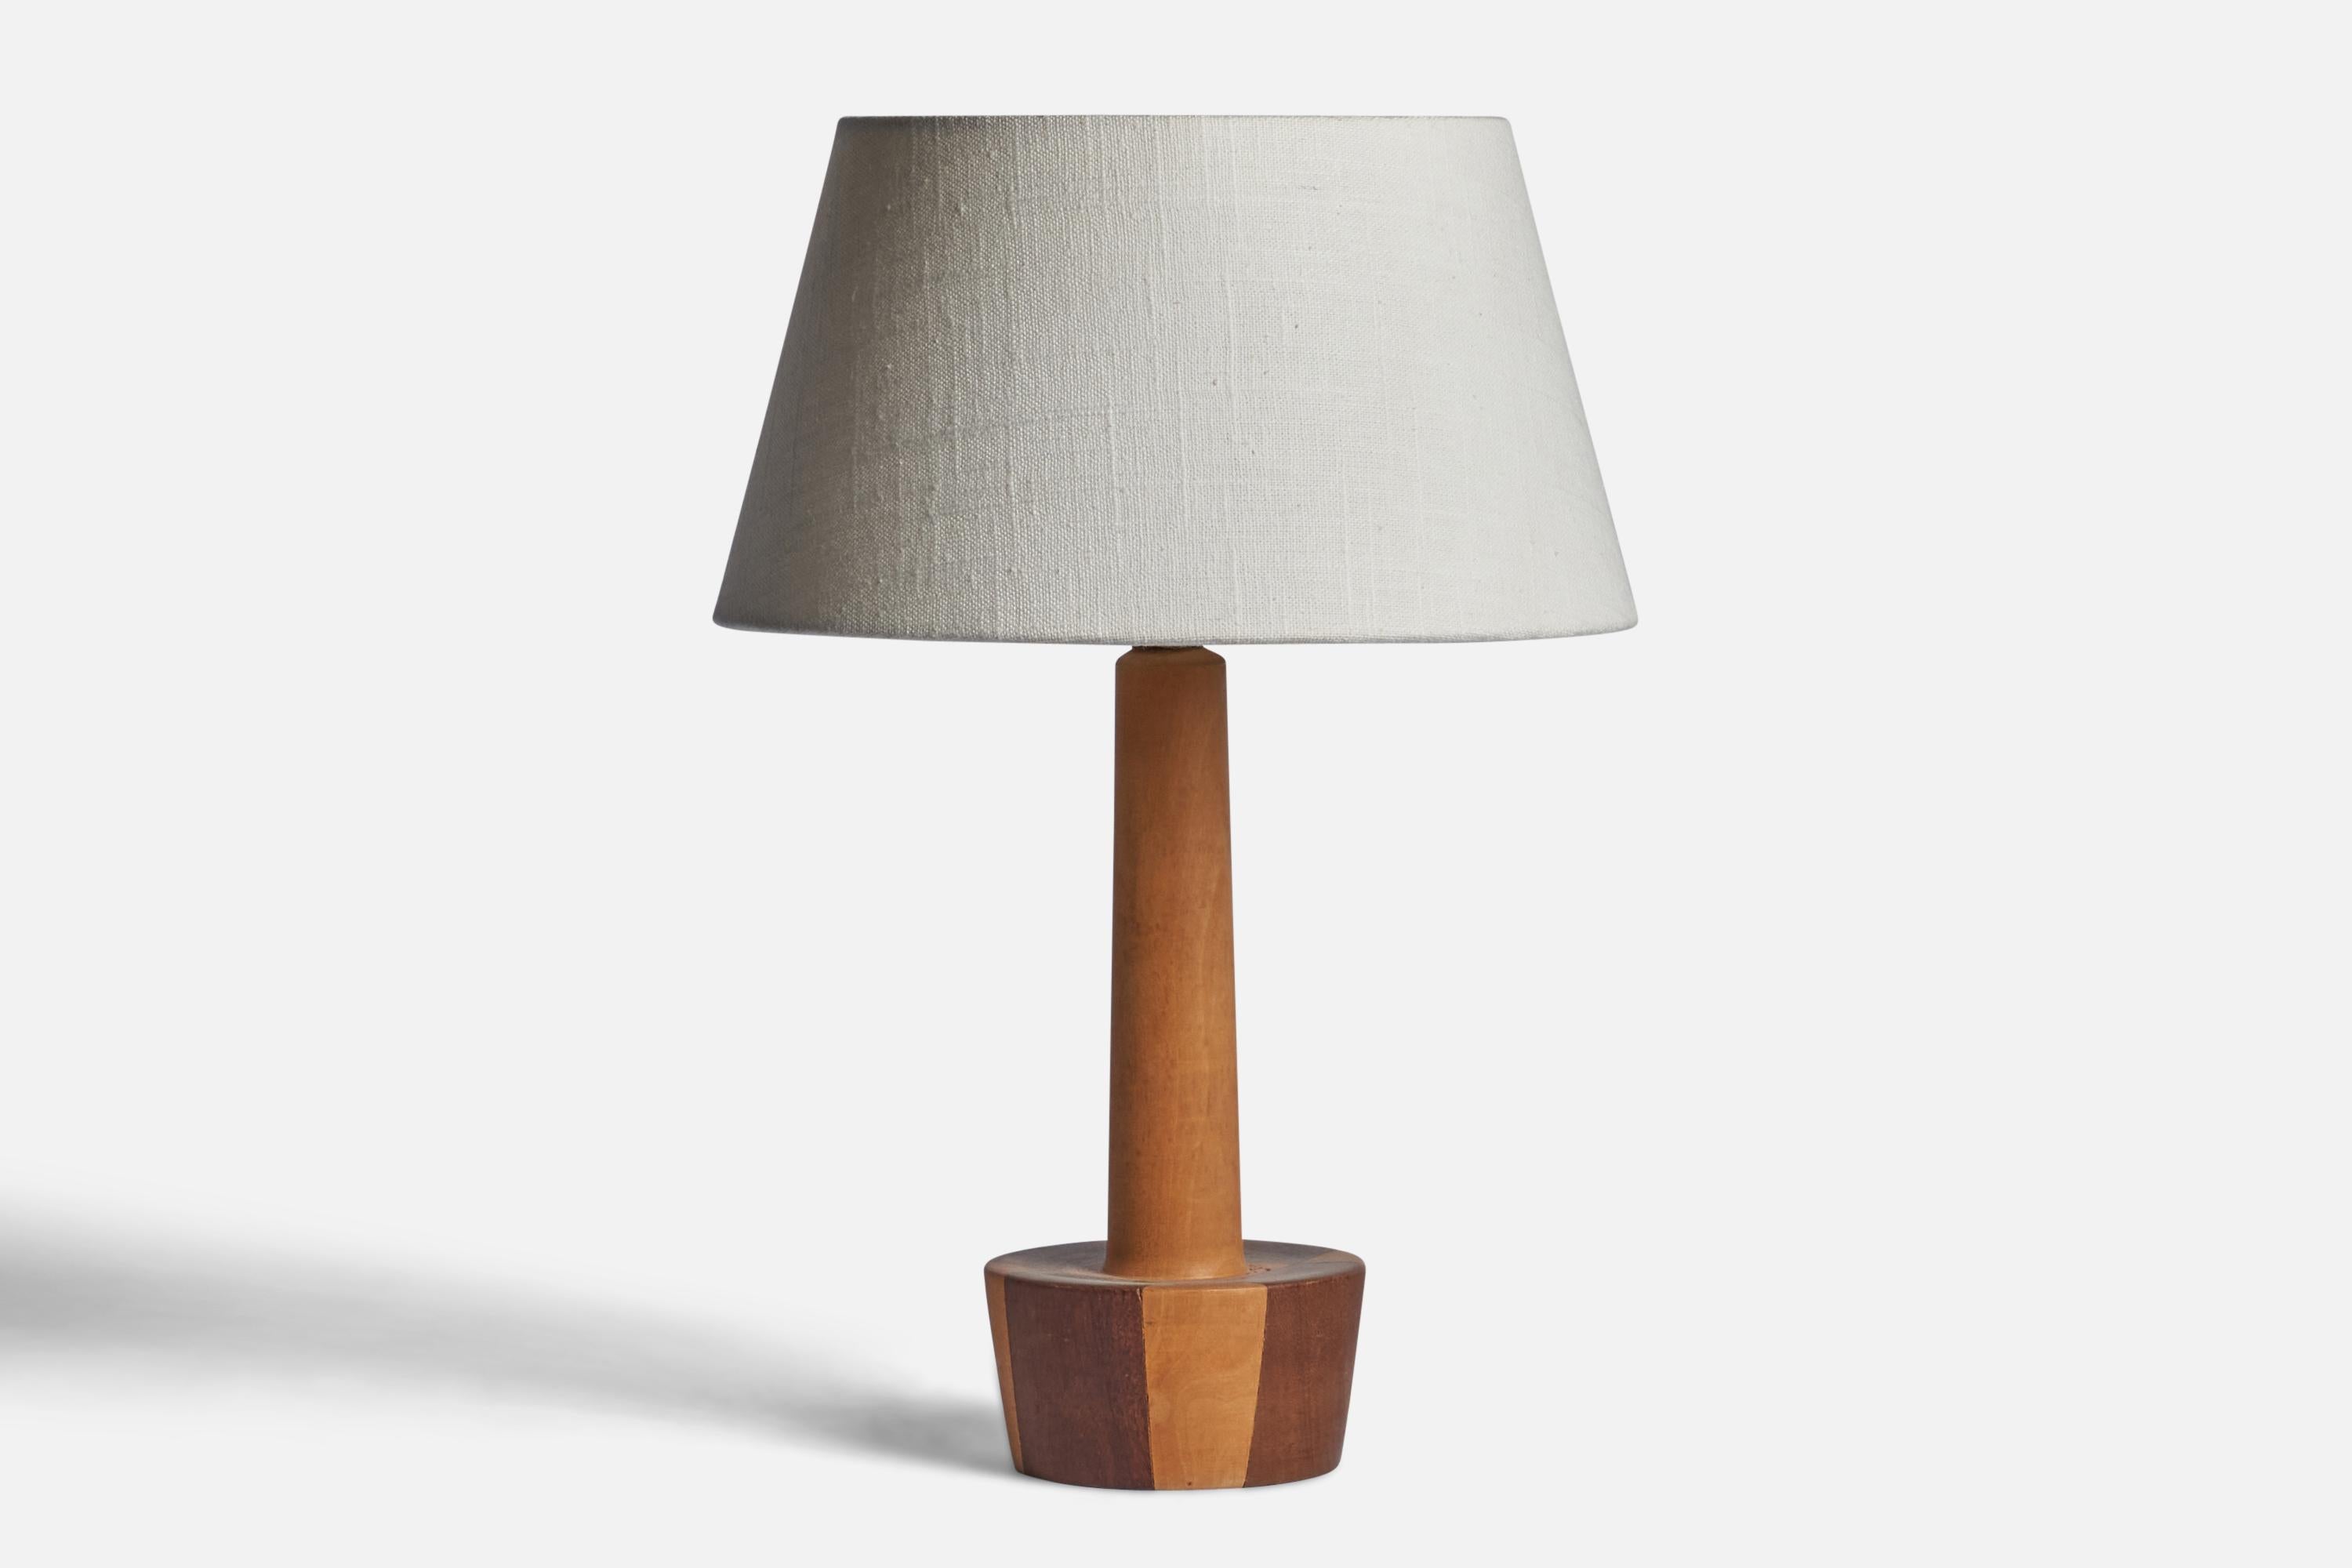 A beech and teak table lamp designed and produced in Denmark, c. 1950s.

Dimensions of Lamp (inches): 12” H x 4.25” Diameter
Dimensions of Shade (inches): 7” Top Diameter x 10” Bottom Diameter x 5.5” H 
Dimensions of Lamp with Shade (inches): 14.65”